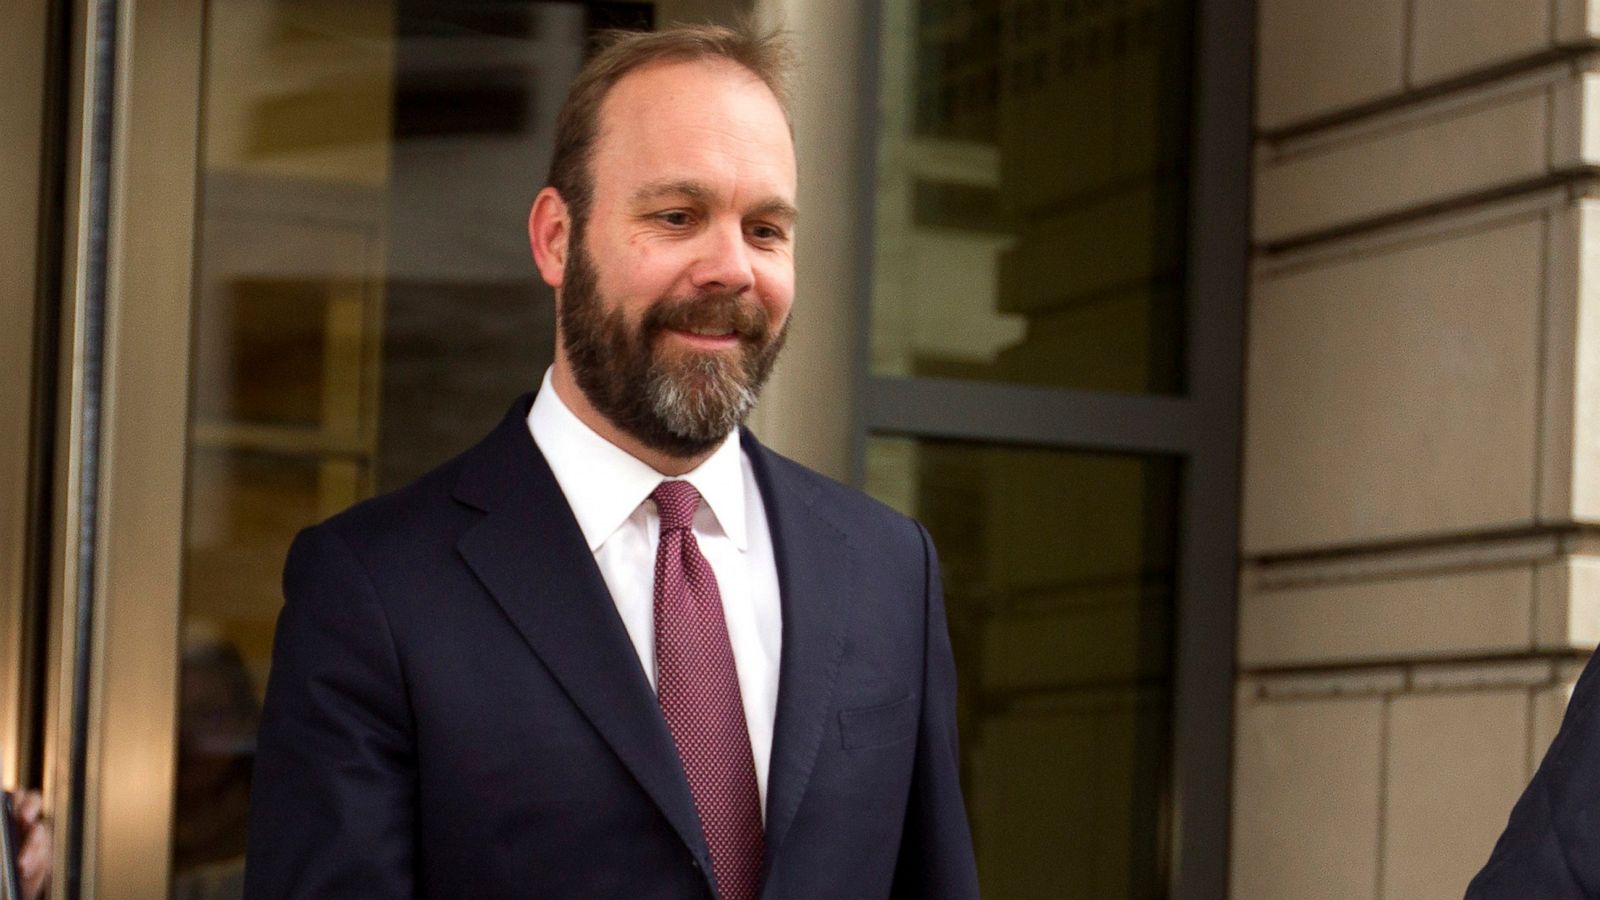 Ex Trump Campaign Official Rick Gates Gets 45 Days In Jail Abc News Images, Photos, Reviews